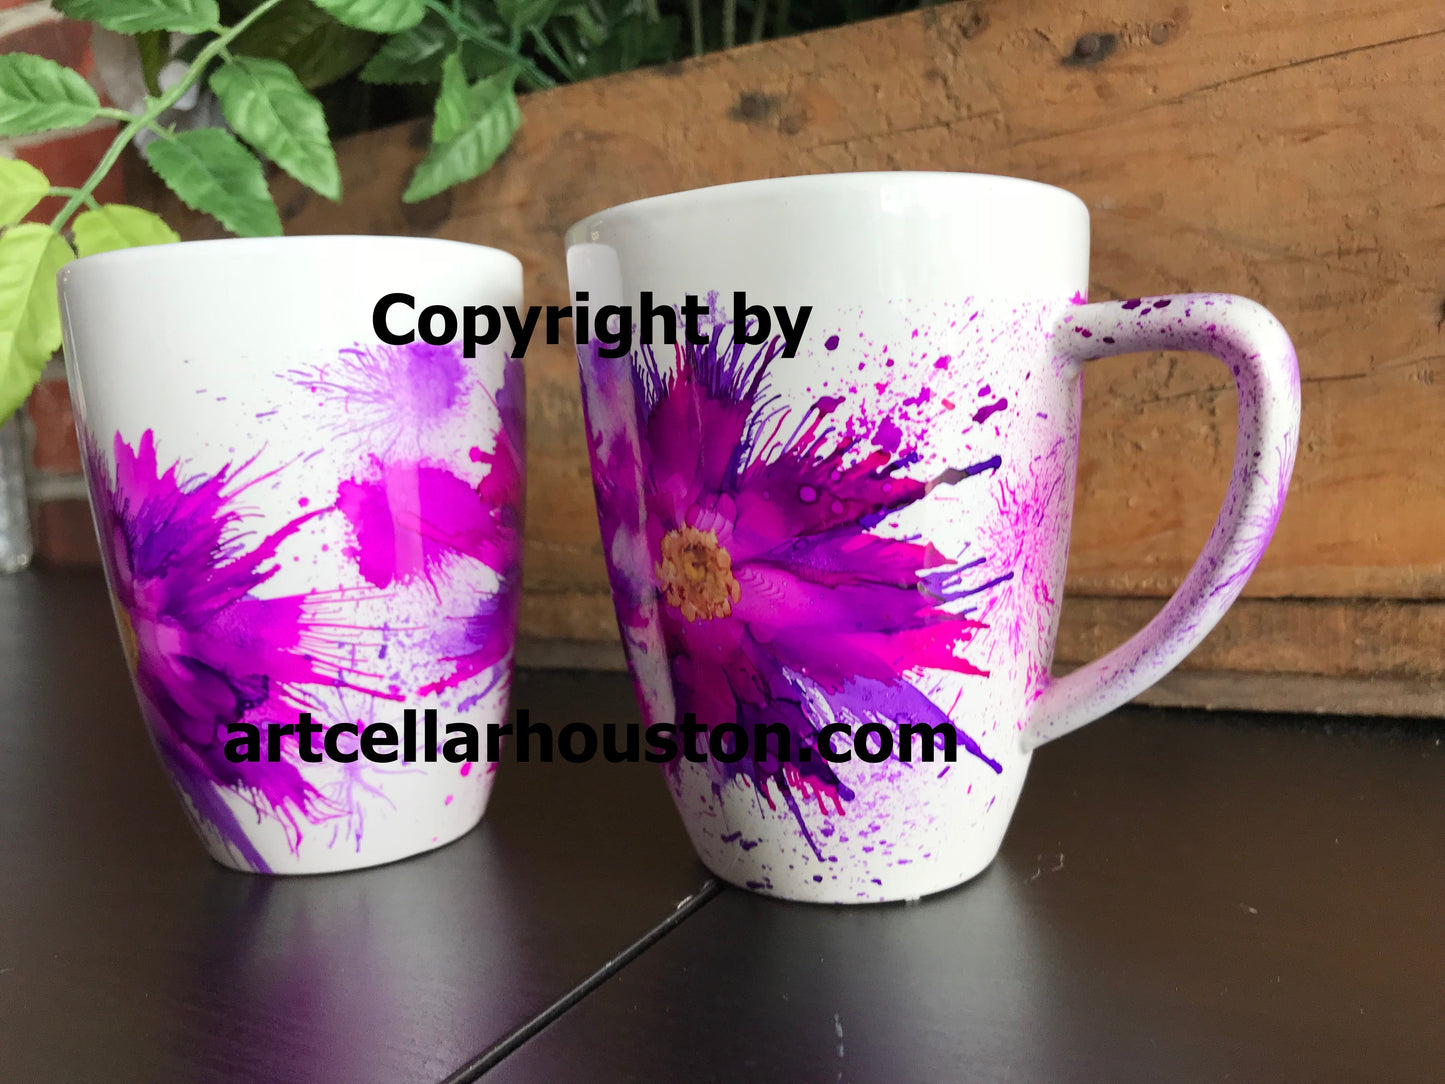 Thu, Mar 28th, 6-8P “Alcohol Ink Mugs” Private Houston Wine & Paint Party